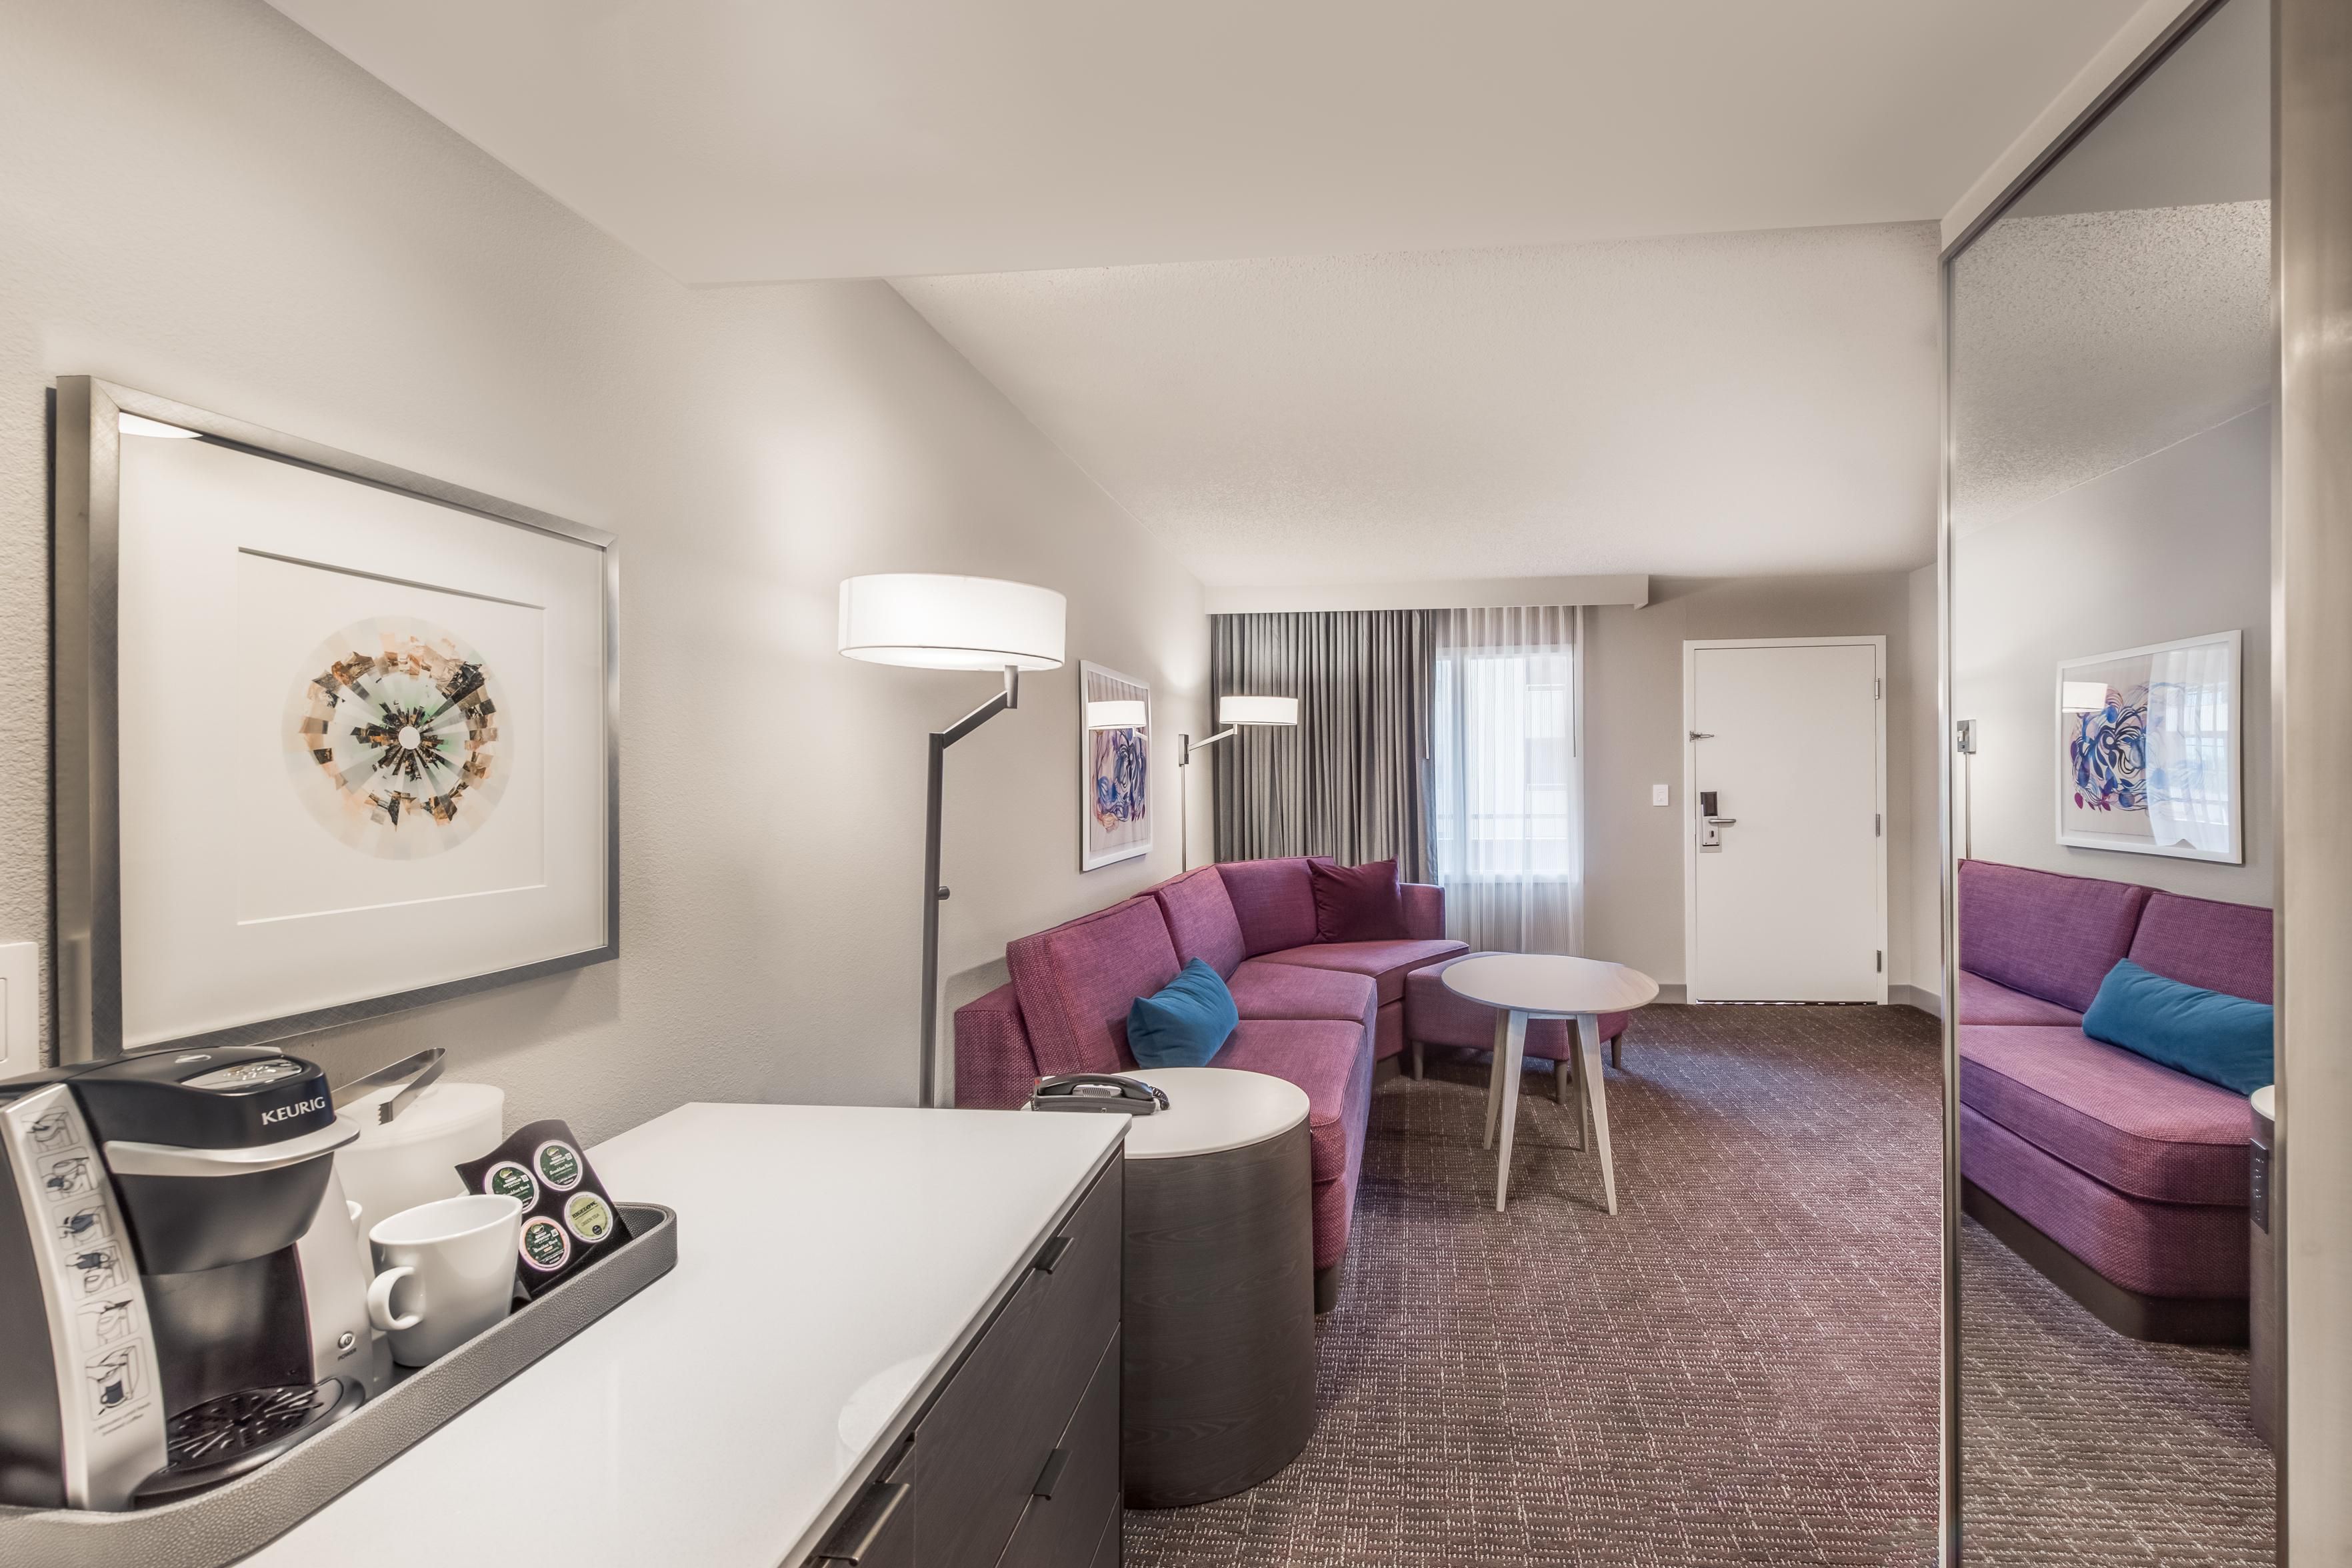 Suite with natural light and plenty of room to unwind and relax